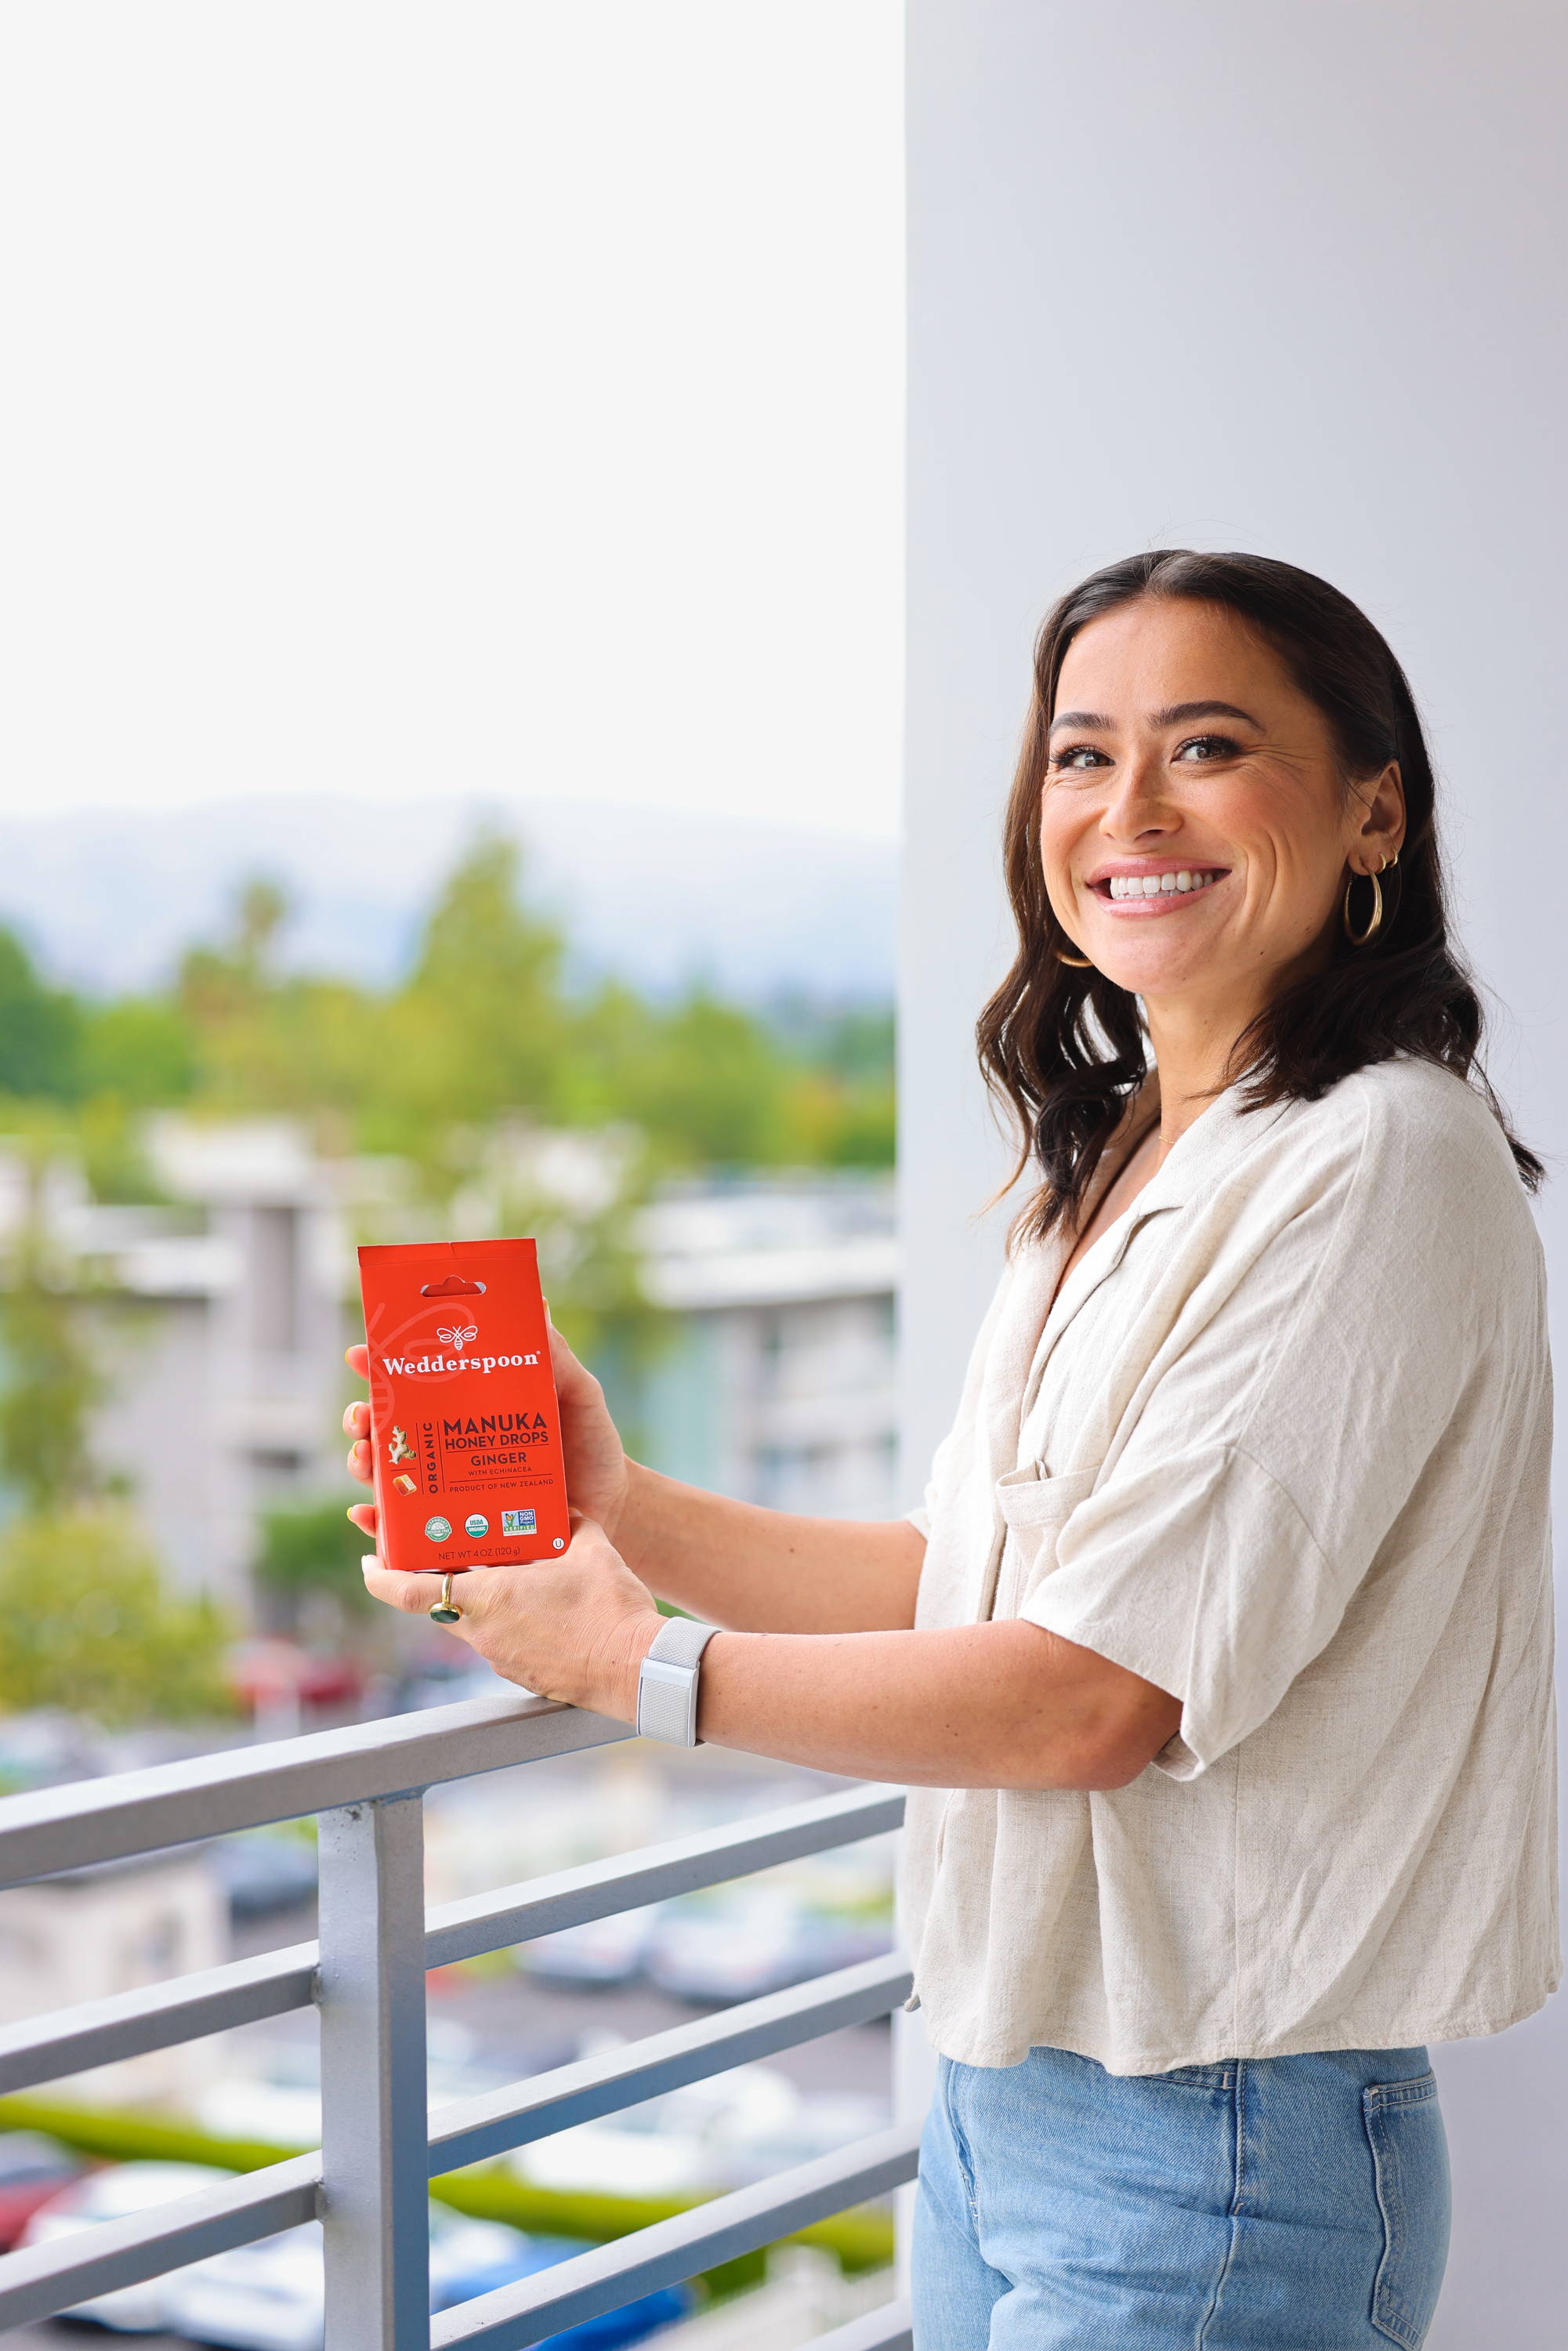 Ali Riley, professional soccer player, holding a box of Wedderspoon Organic Manuka Honey Drops - Ginger, a delicious and energizing snack for athletes and health-conscious individuals.